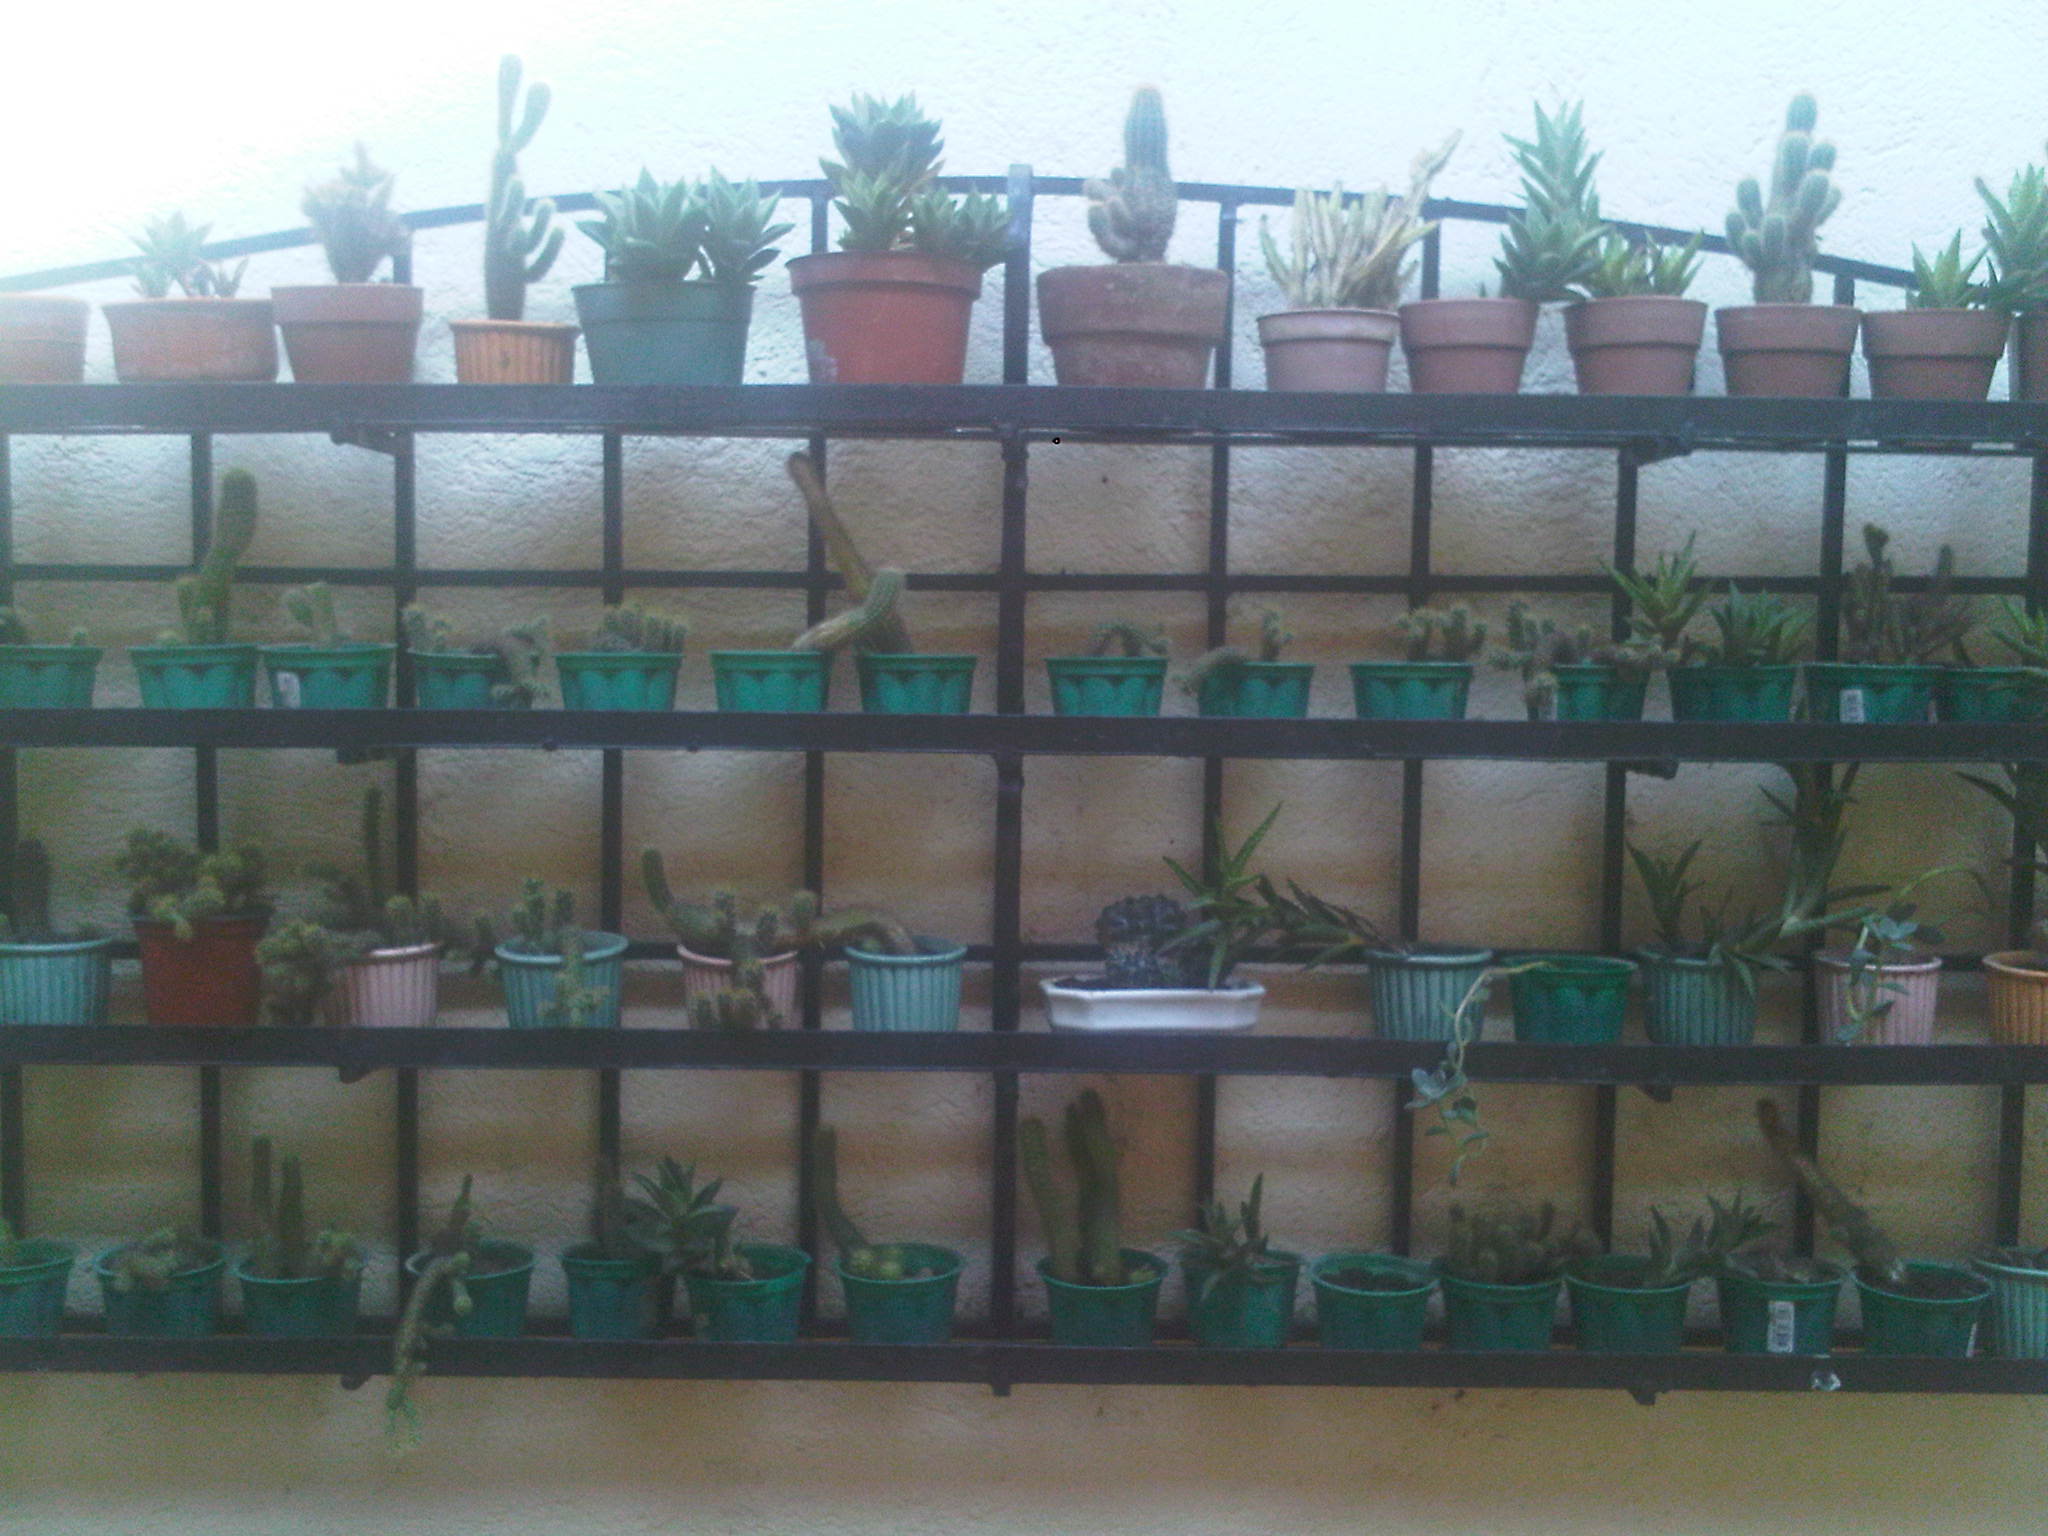 several shelves of various plants that are growing